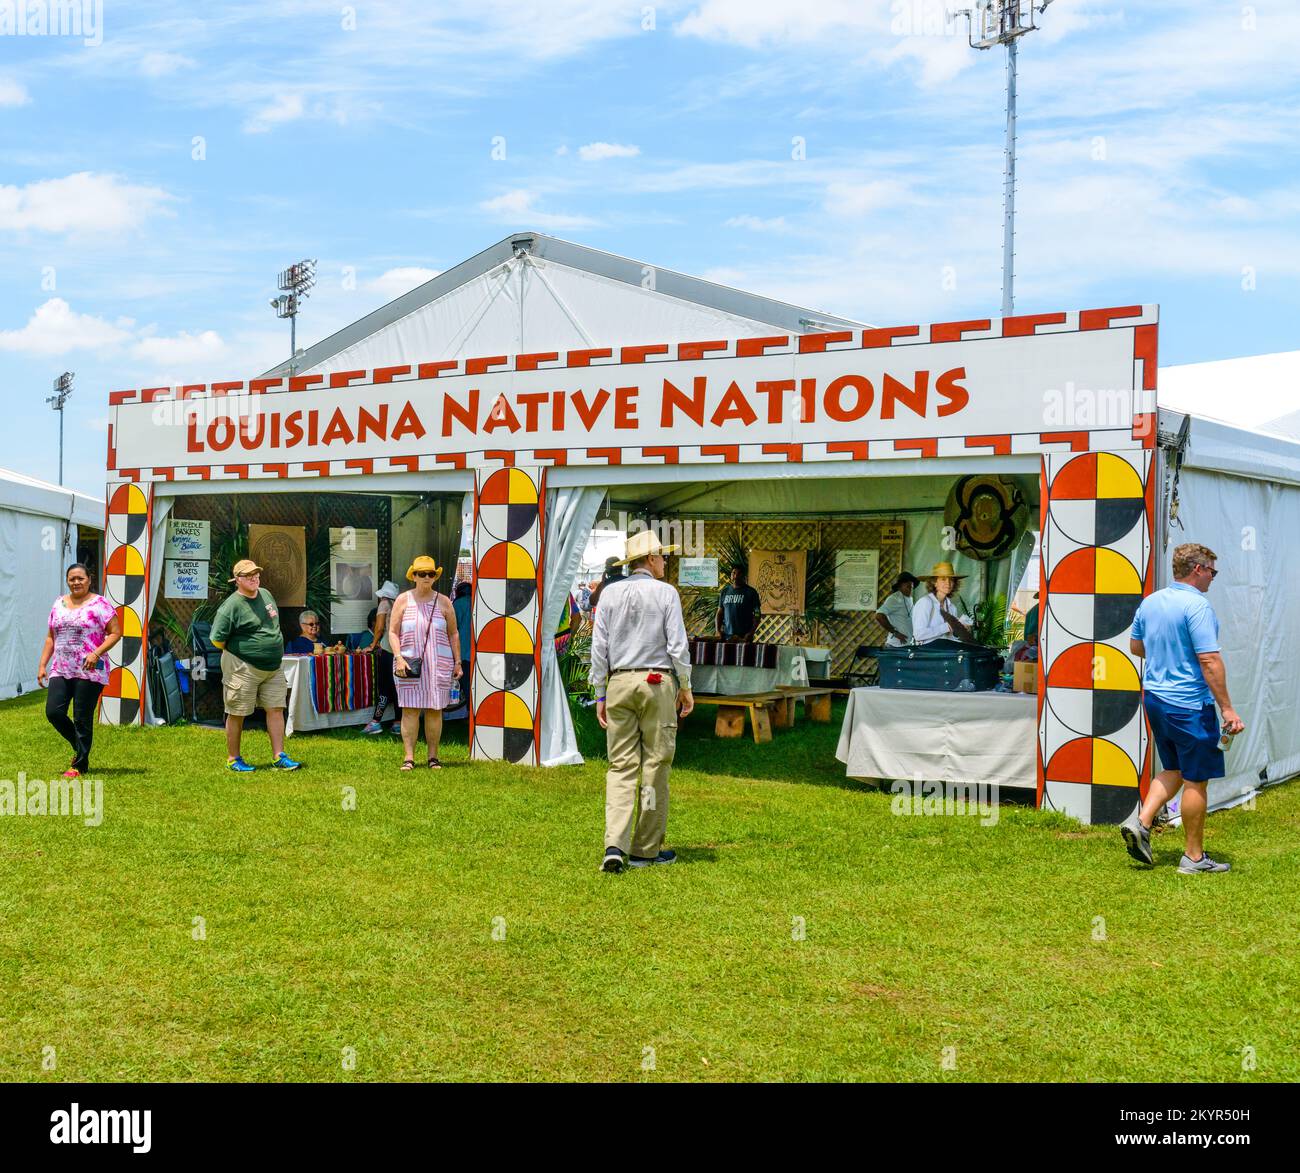 NEW ORLEANS, LA, USA - 29. APRIL 2022: Das New Orleans Jazz and Heritage Festival 2022 in Louisiana Native Nations Stockfoto